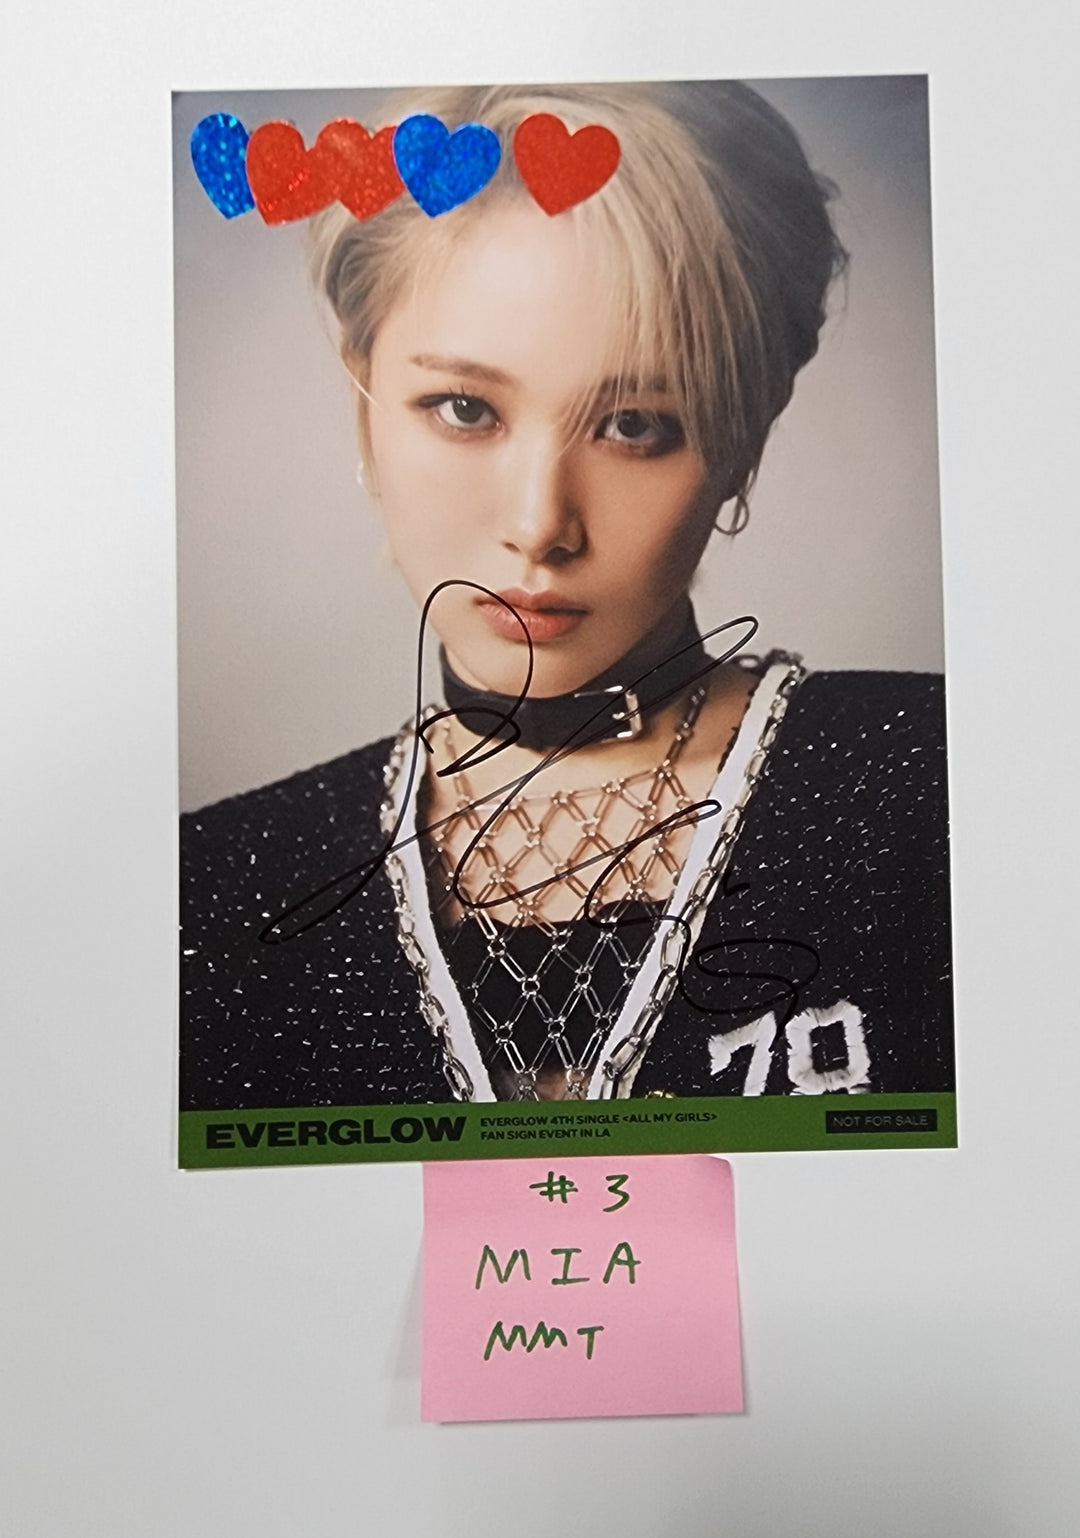 Everglow "ALL MY GIRLS" - MMT Fansign Event Hand Autographed(Signed) Postacard [23.09.07]